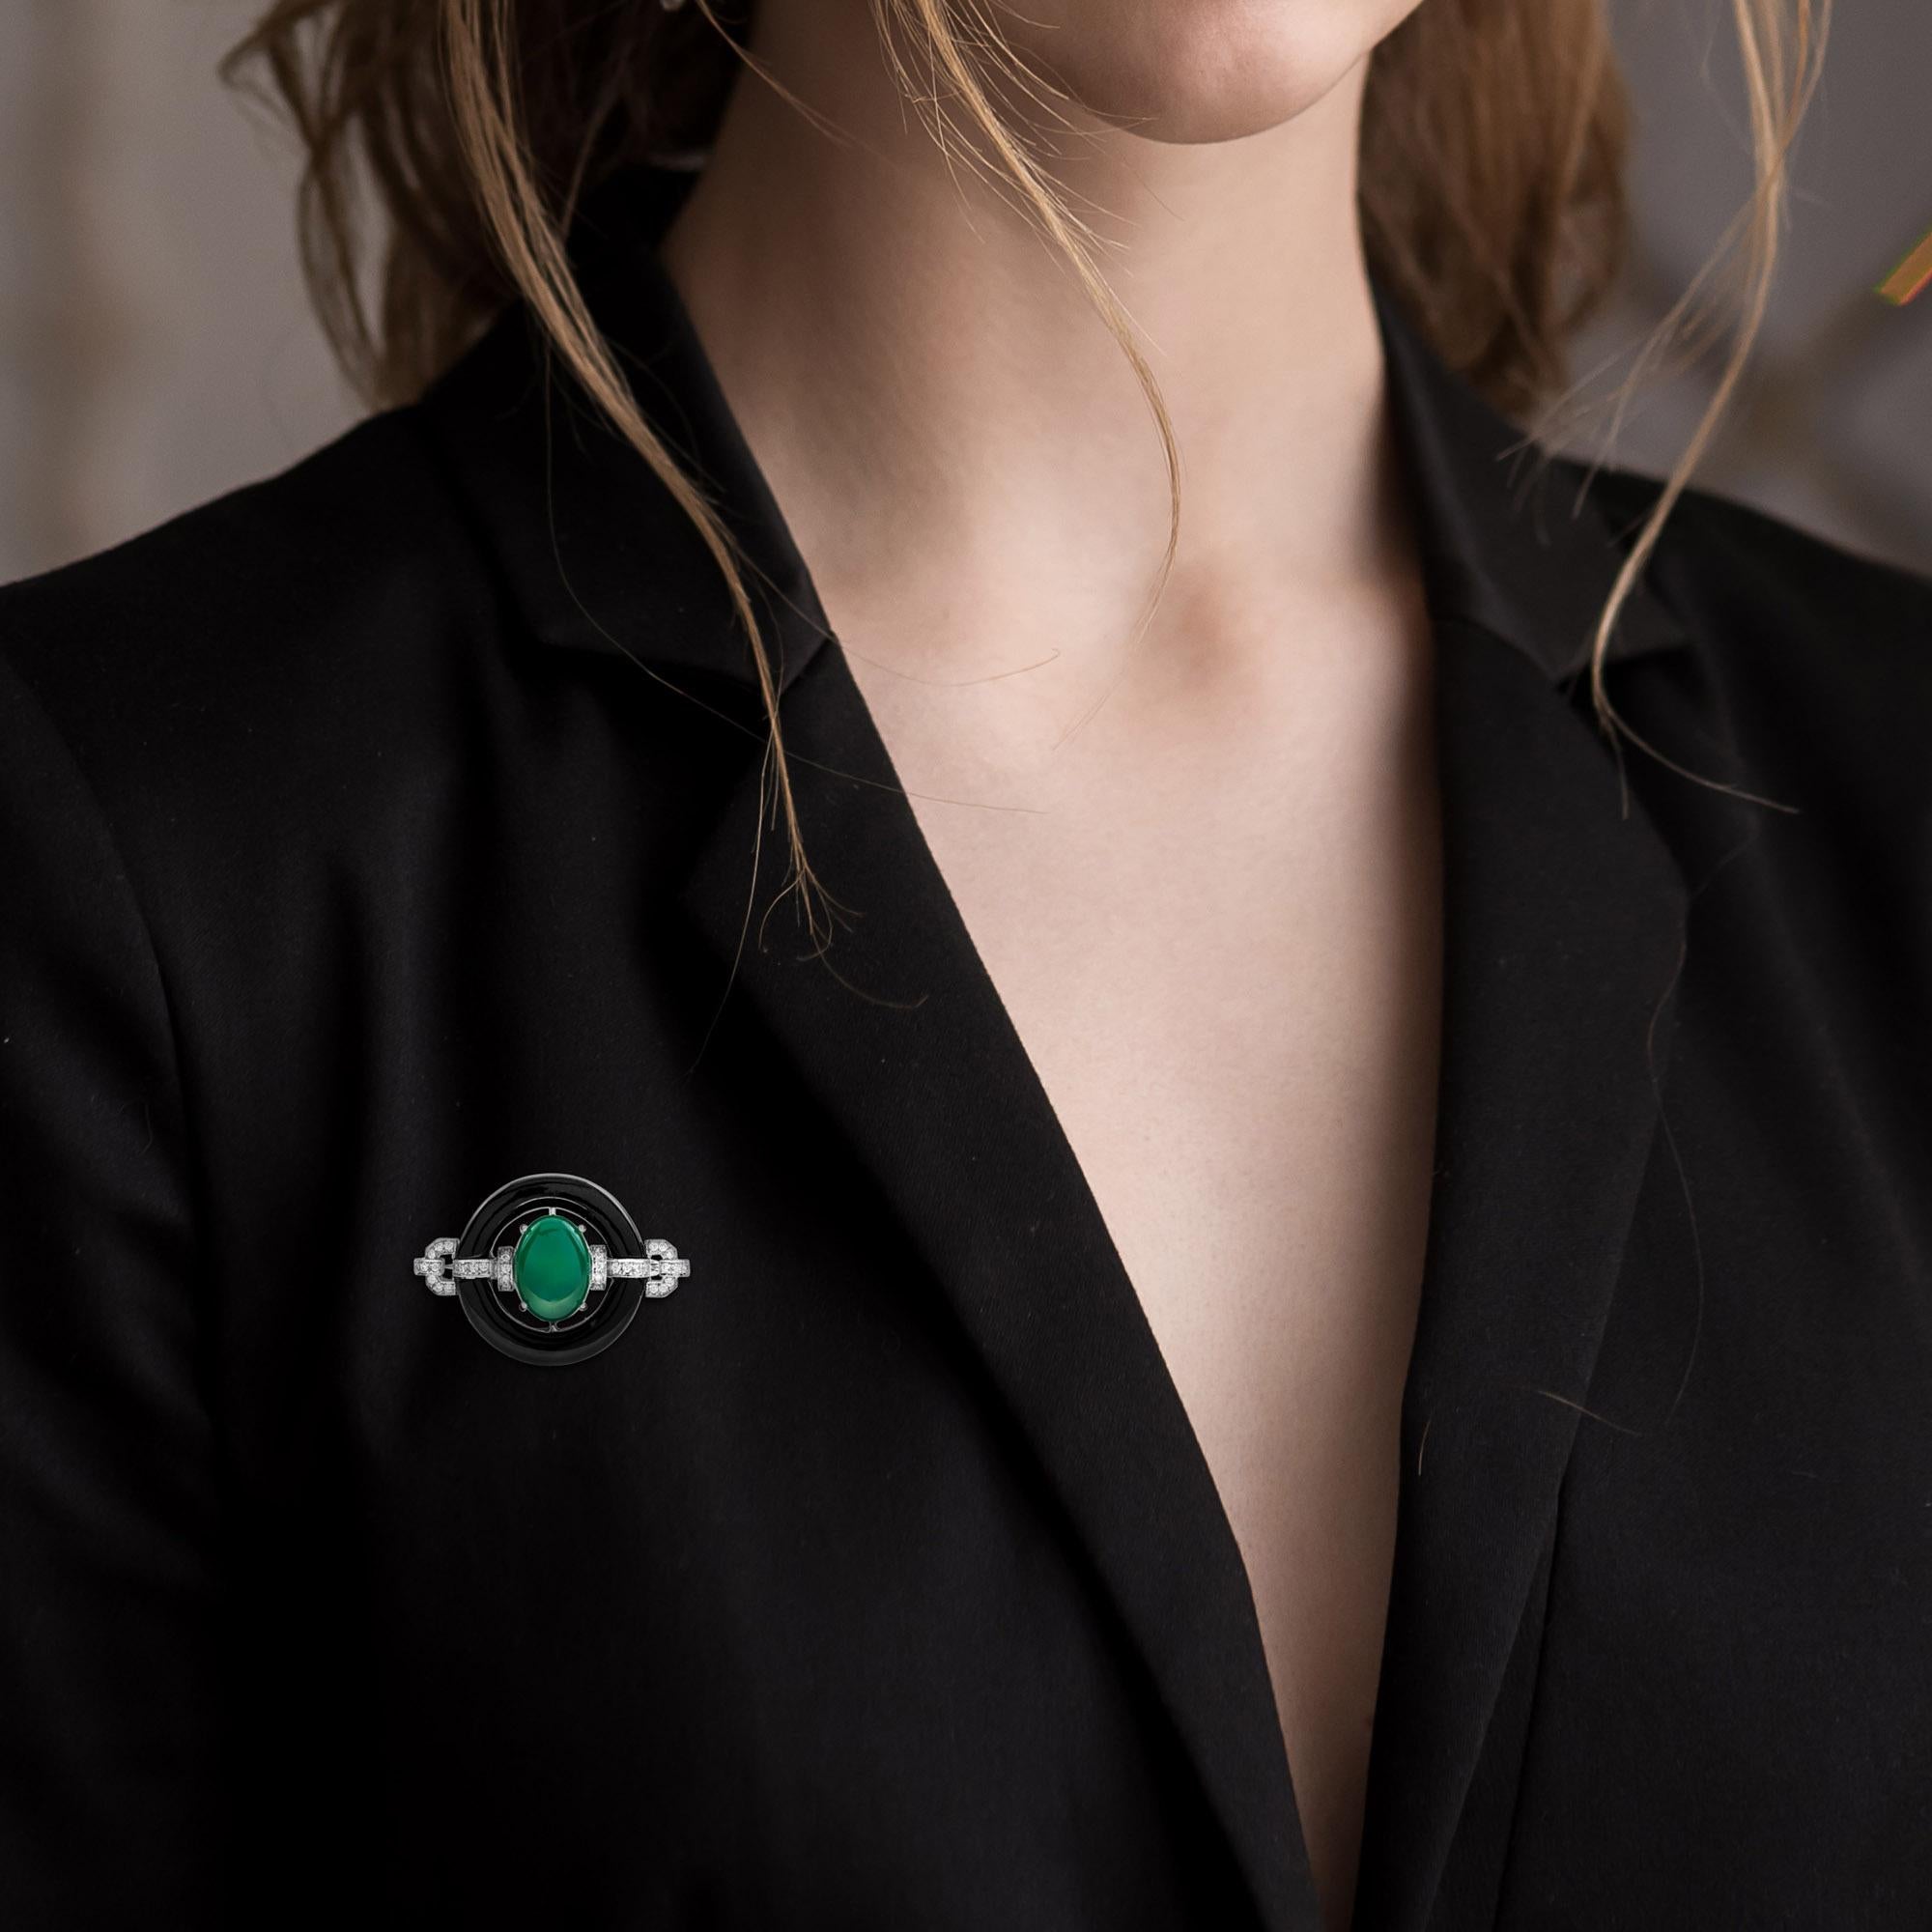 Striking, to state the obvious, this Art Deco inspired brooch, centering a 5 carat cabochon  green agate. A surrounding black donut or ‘bi’ in Chinese is grasped on either end by beautiful glittering diamonds. Crafted in white gold, this subtle